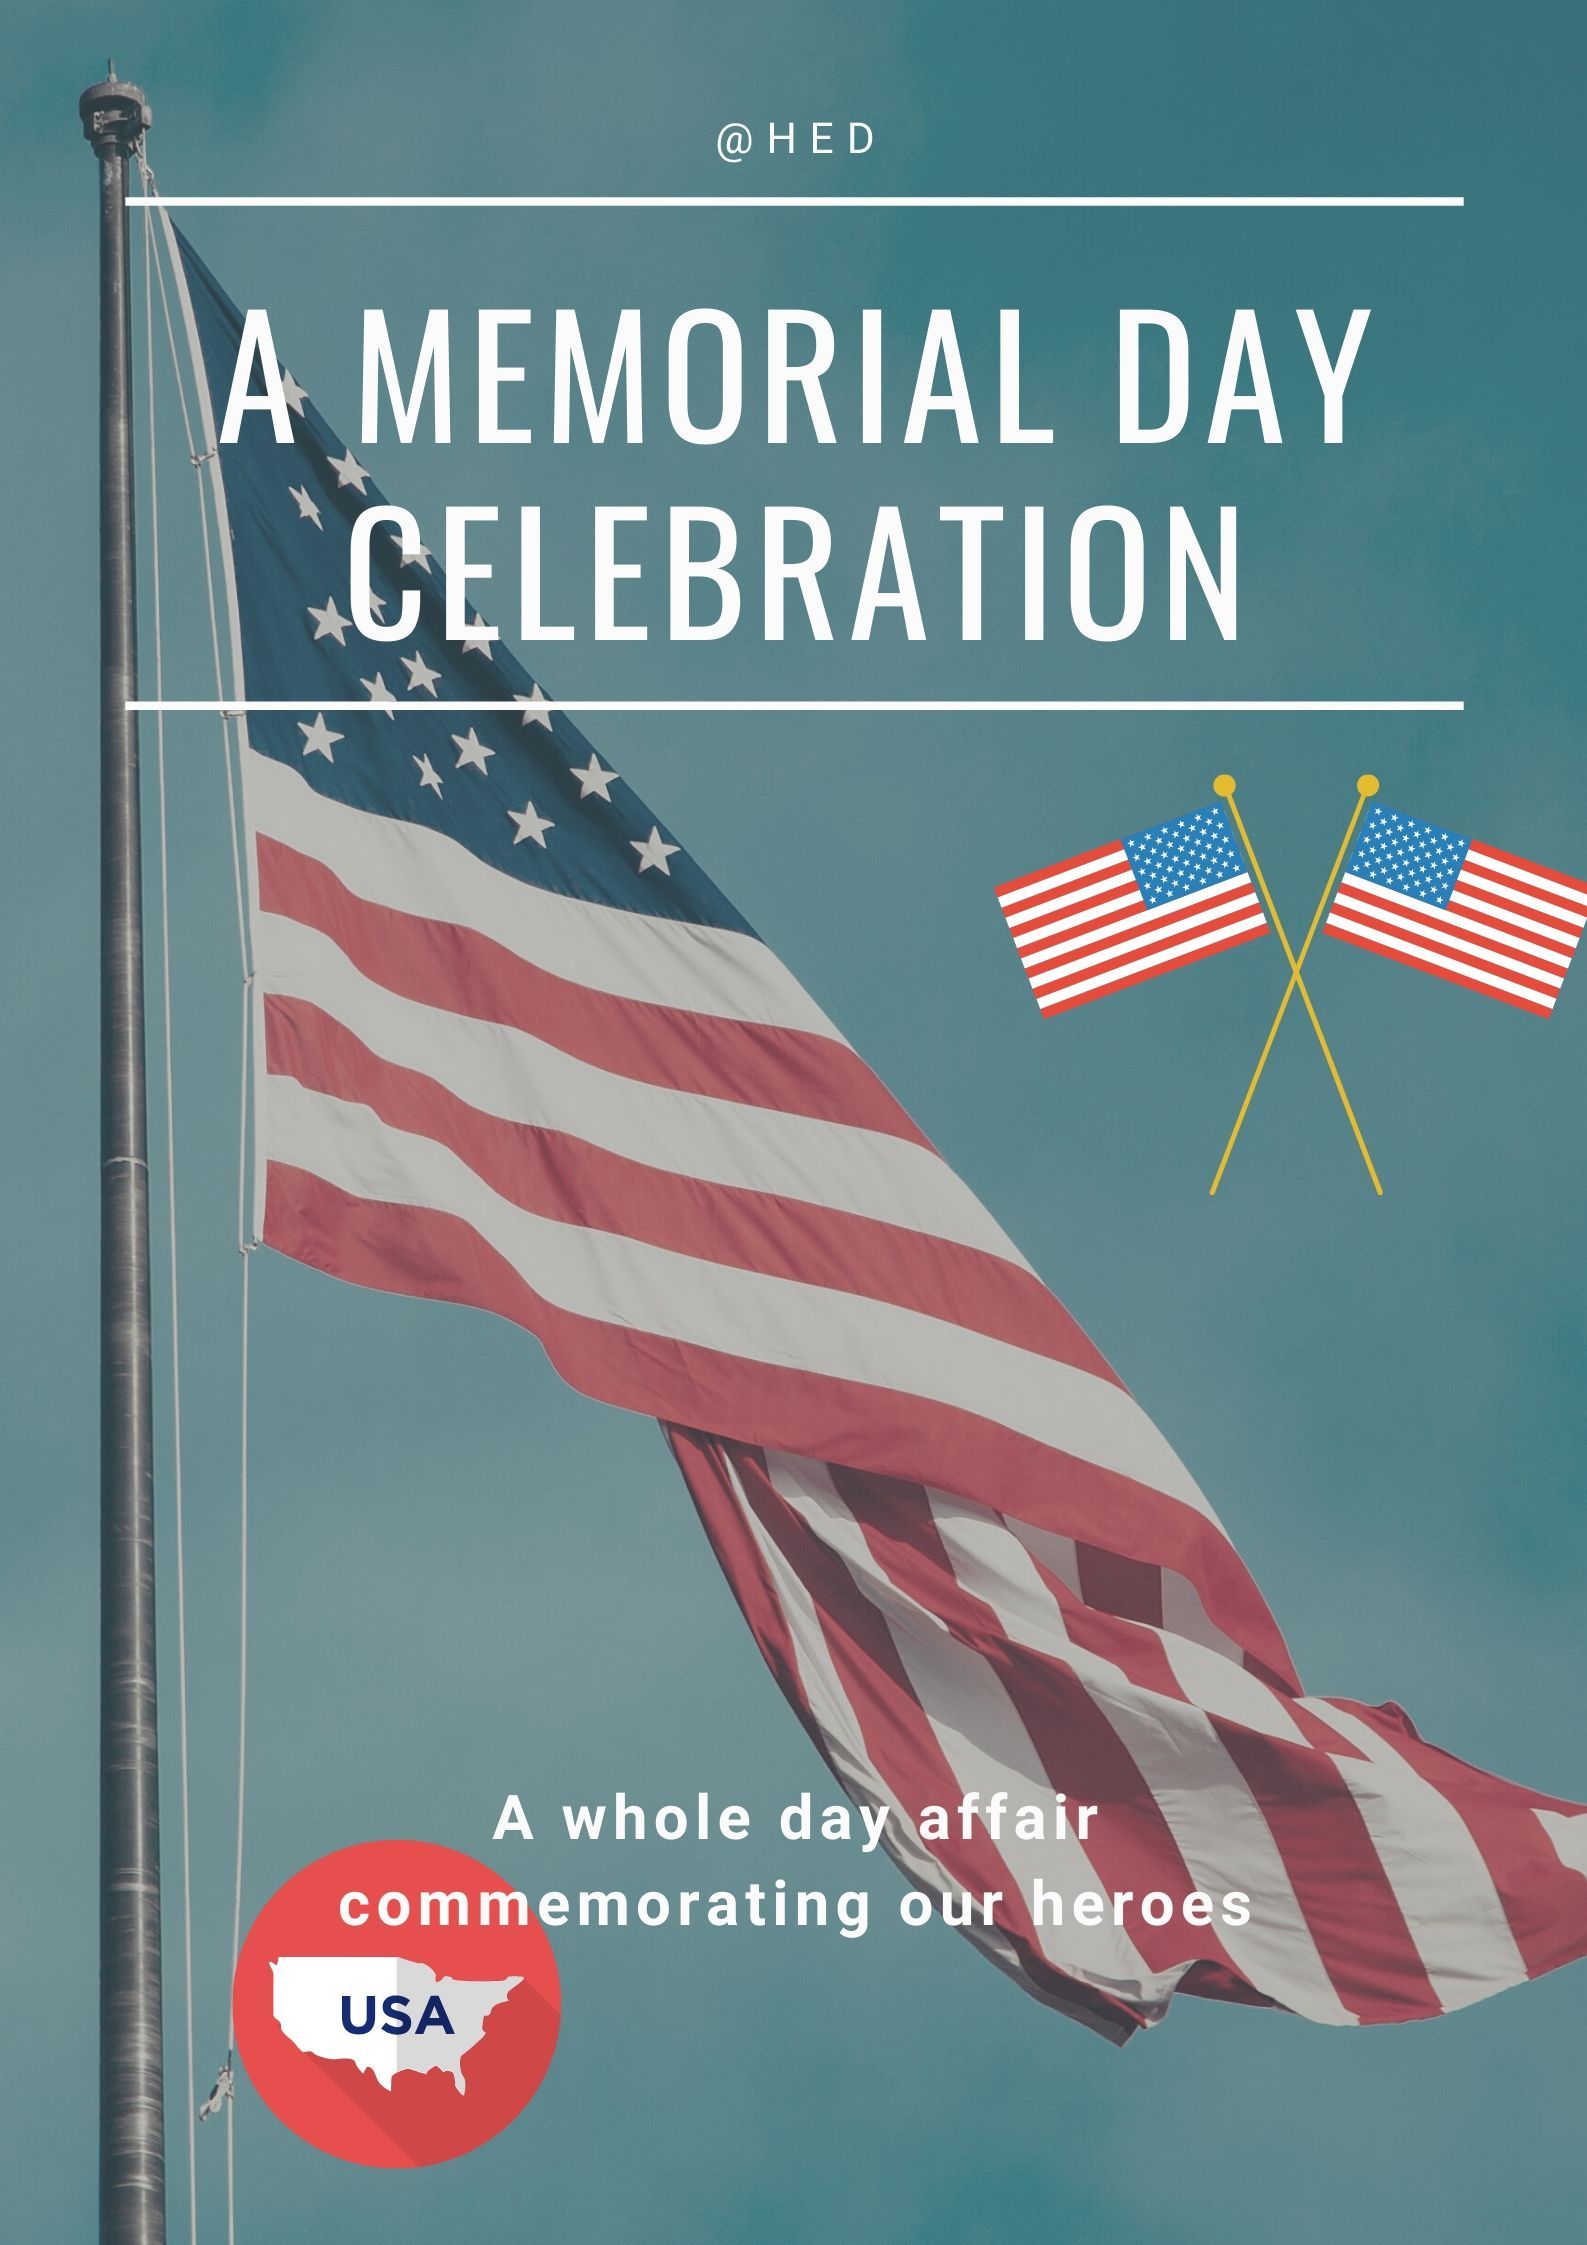 Happy Memorial Day Quotes 2021 Sayings. Messages, Wishes